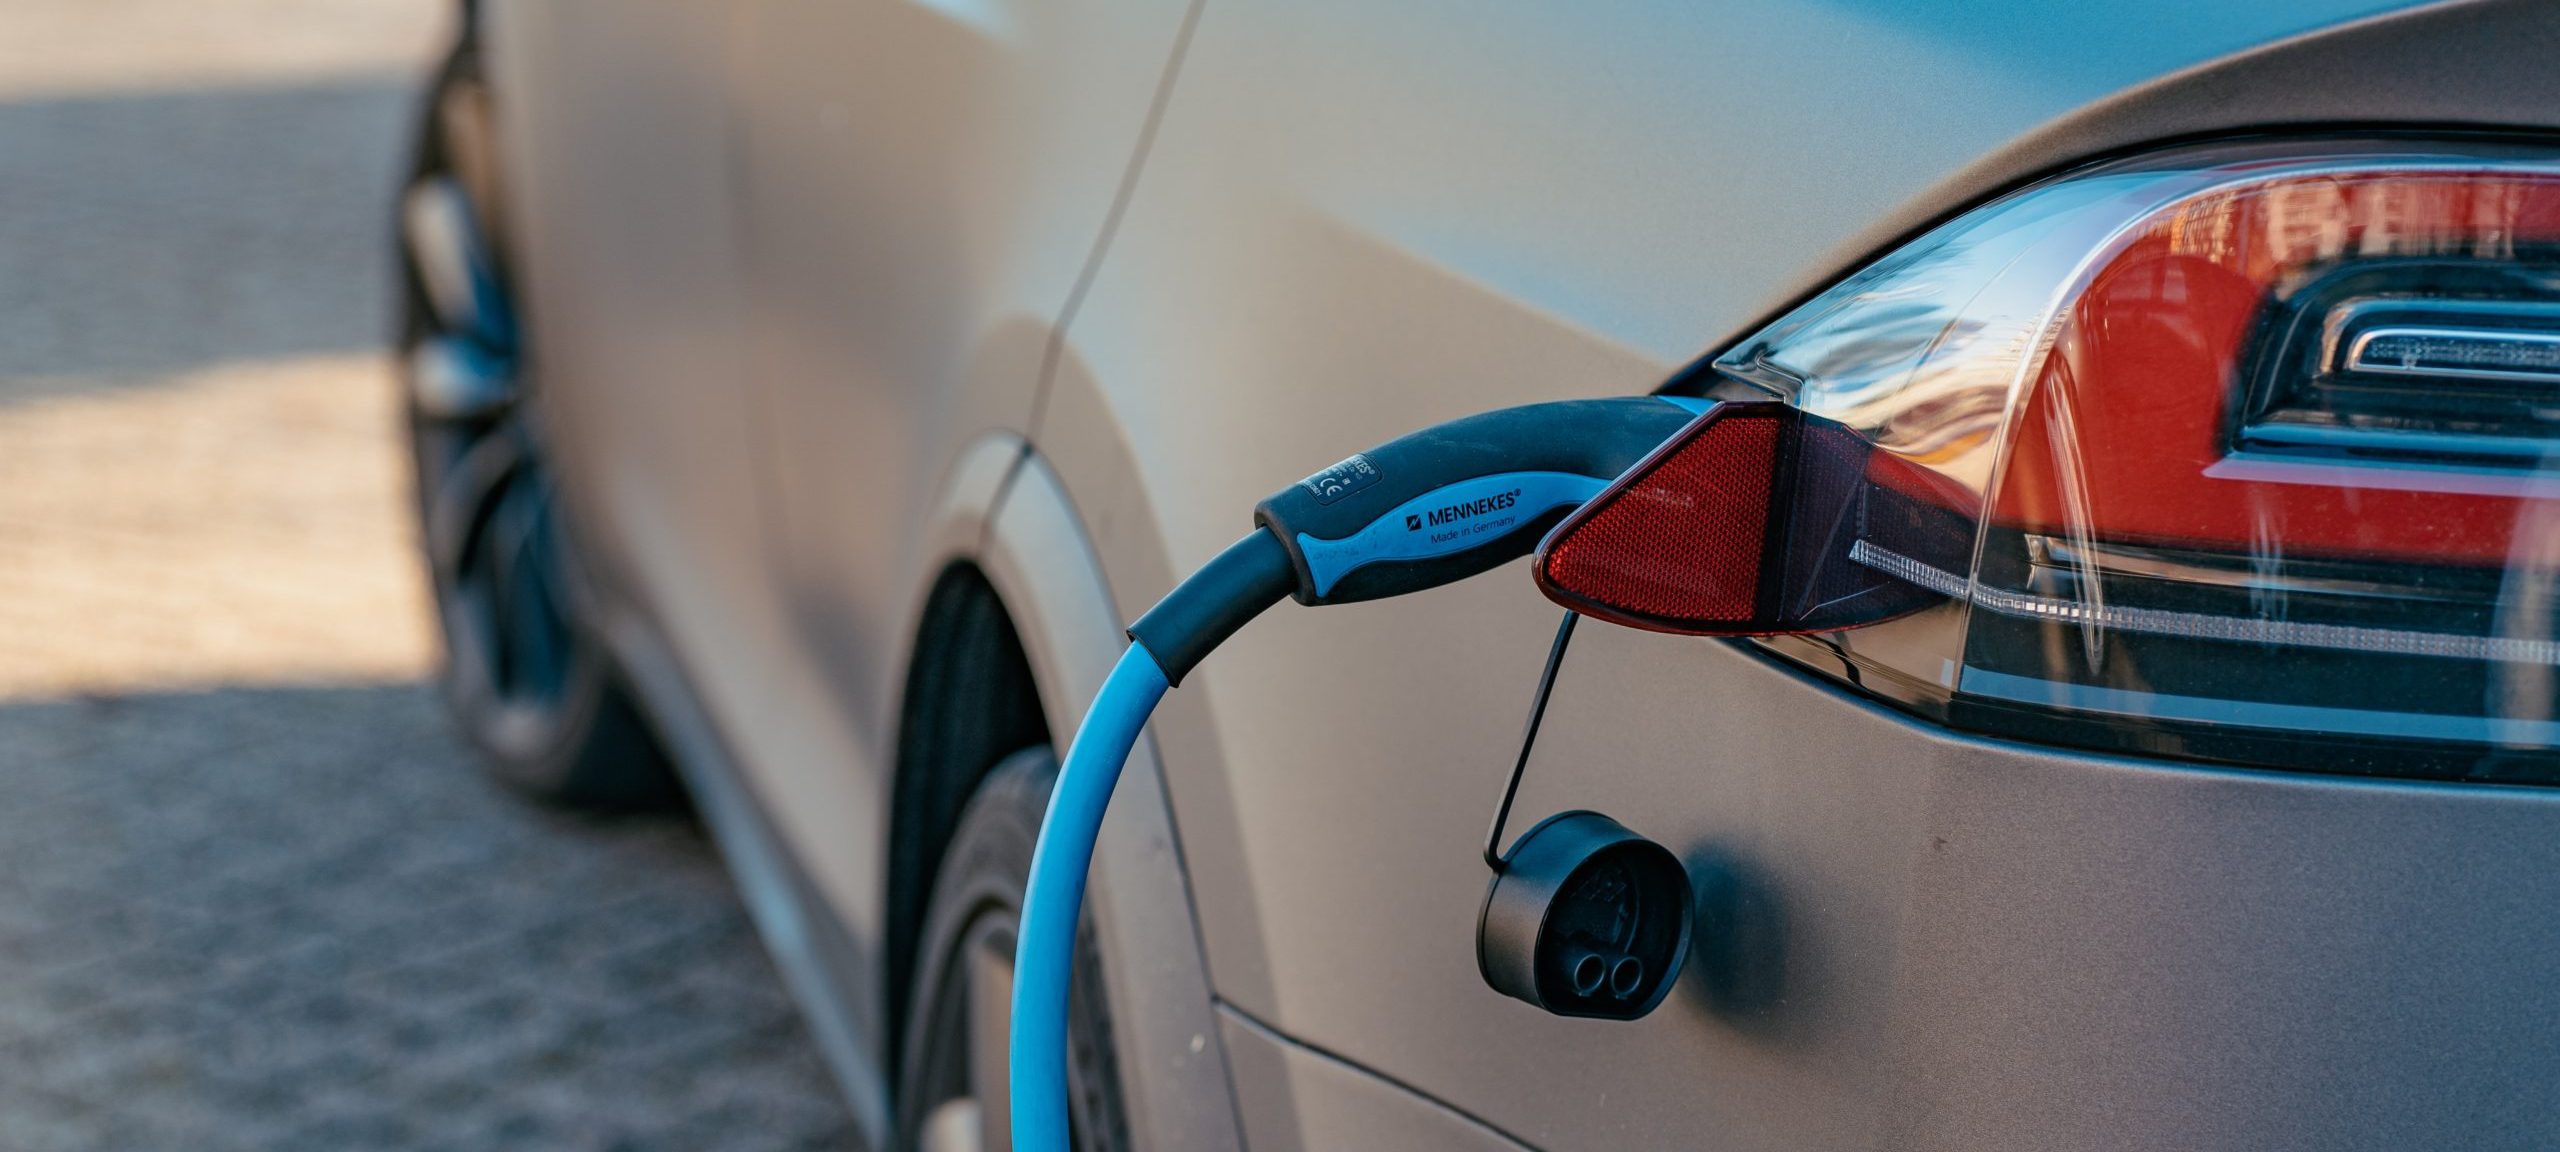 maine-s-electric-vehicle-rebate-program-expands-the-sunriseguide